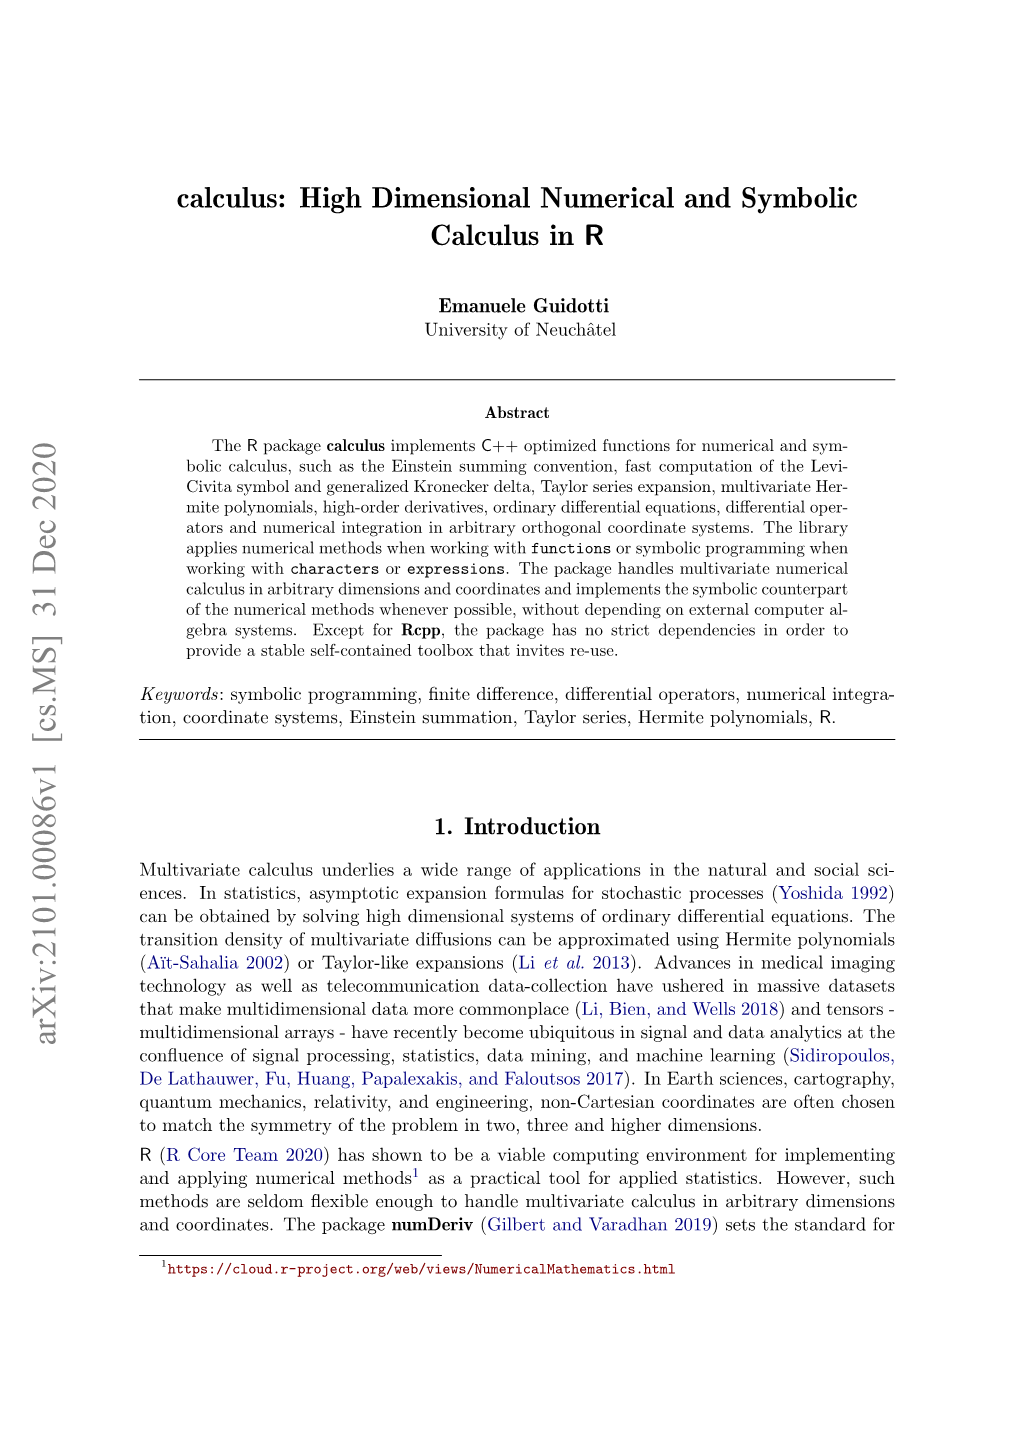 High Dimensional Numerical and Symbolic Calculus in R